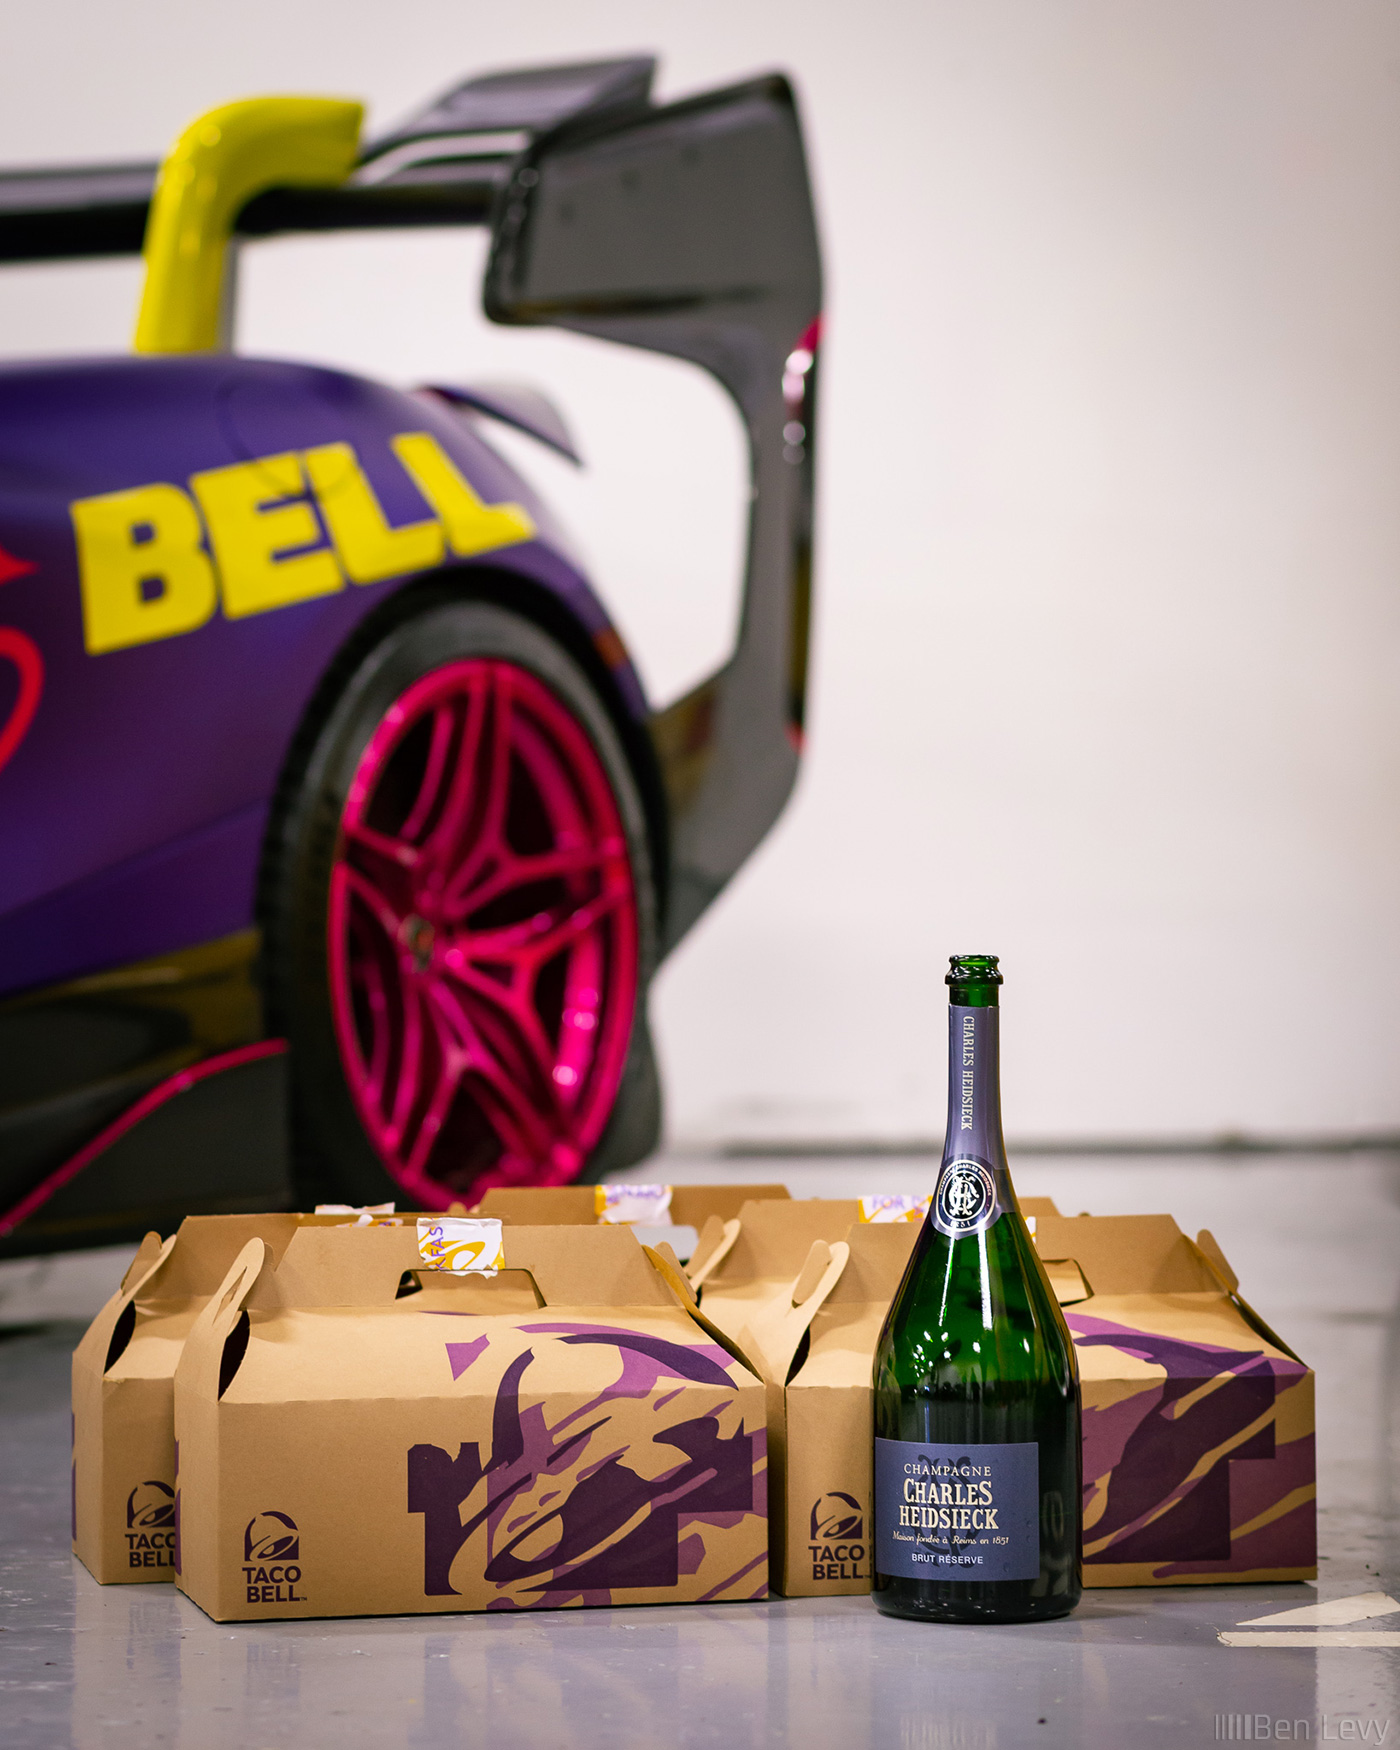 Taco Bell and Charles Heidsieck Champagne